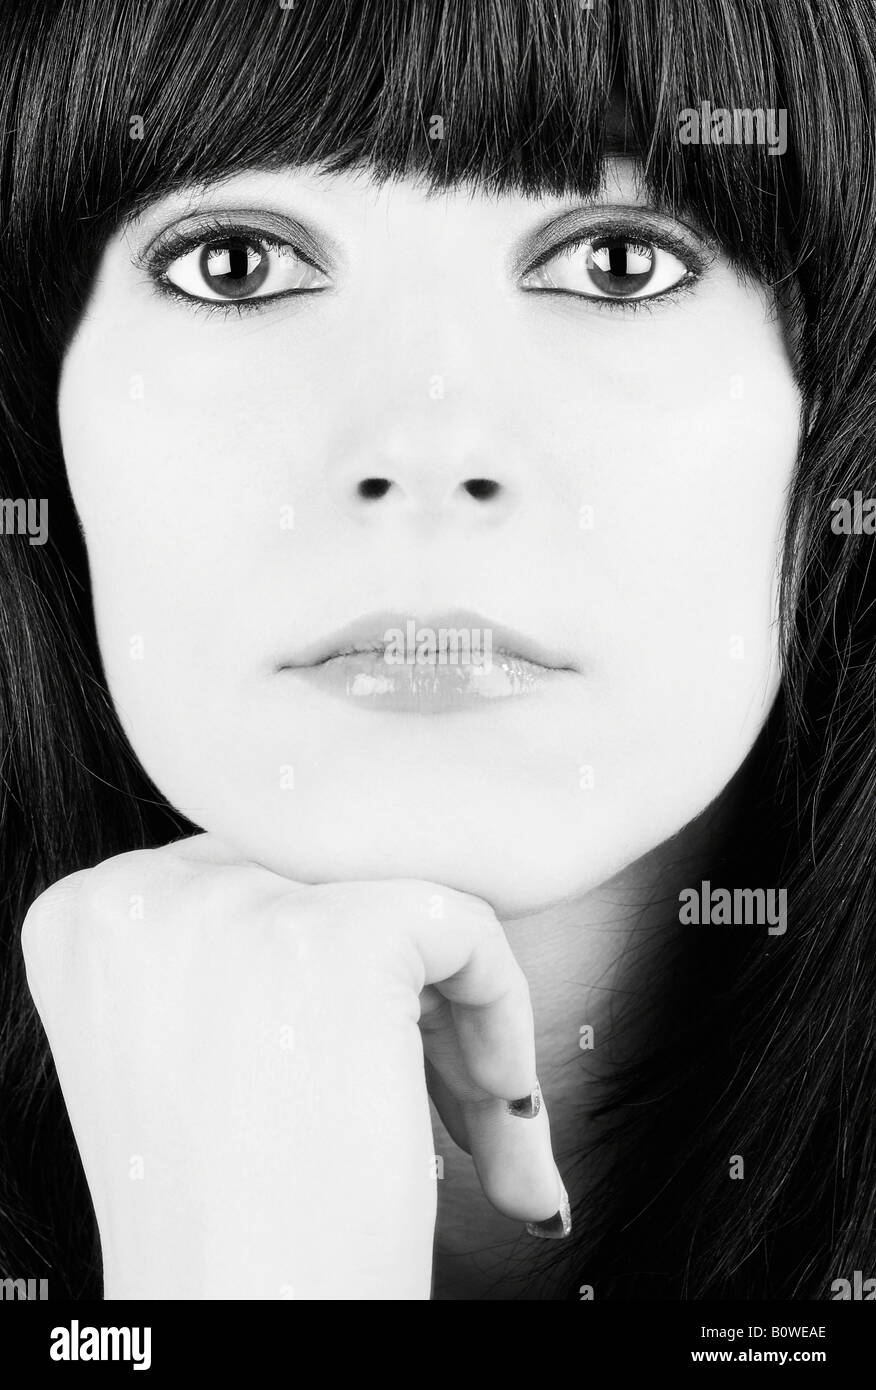 Portrait of a girl with black hair and big eyes resting her chin on her hand, black and white Stock Photo